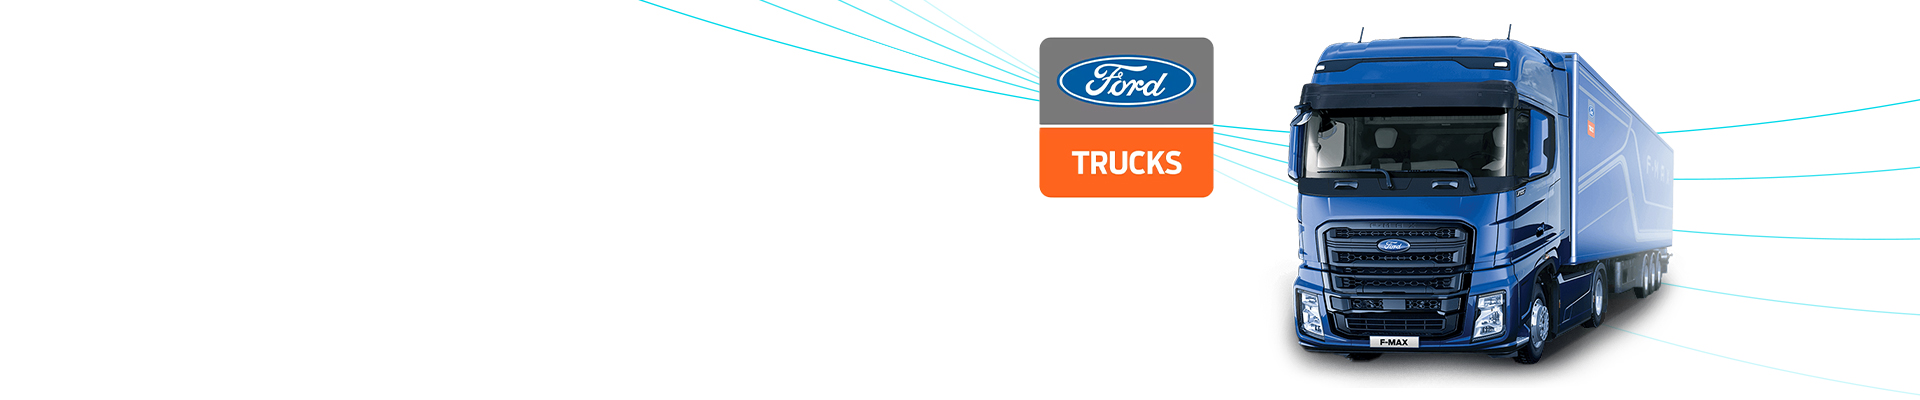 Ford Trucks Partners with Argus Cyber Security to Meet Regulatory Requirements and Accelerate Time-to-Market